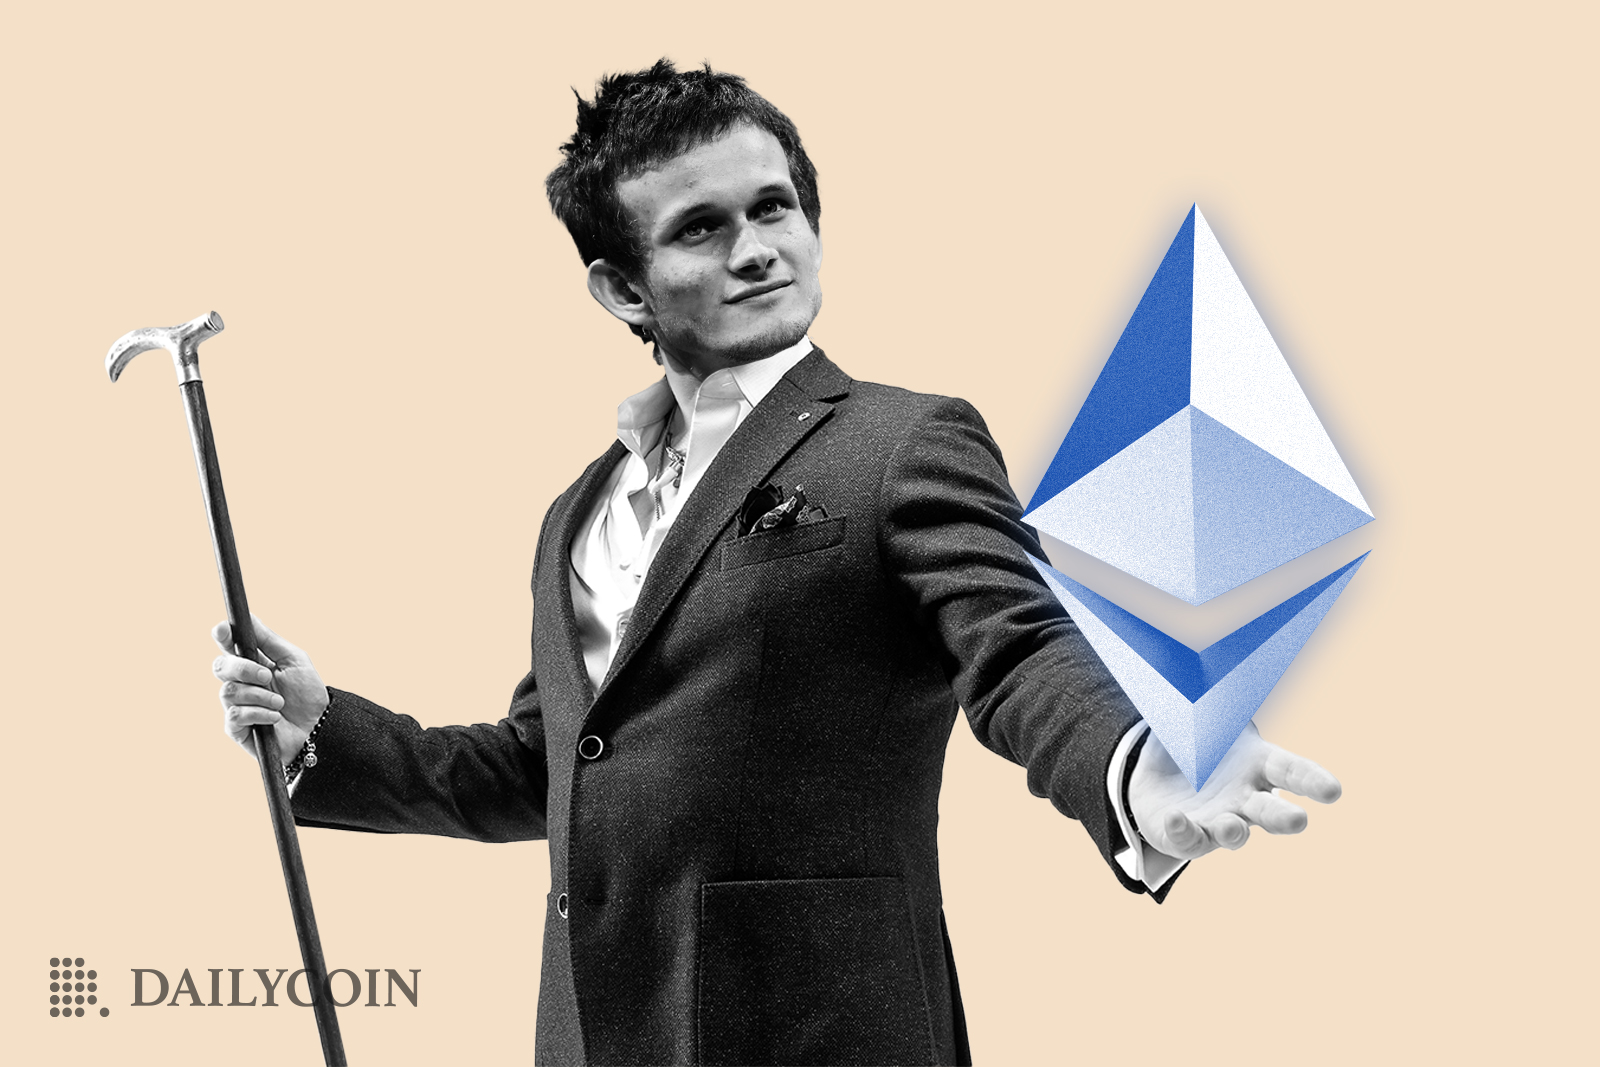 7 Ethereum to US Dollar or convert 7 ETH to USD